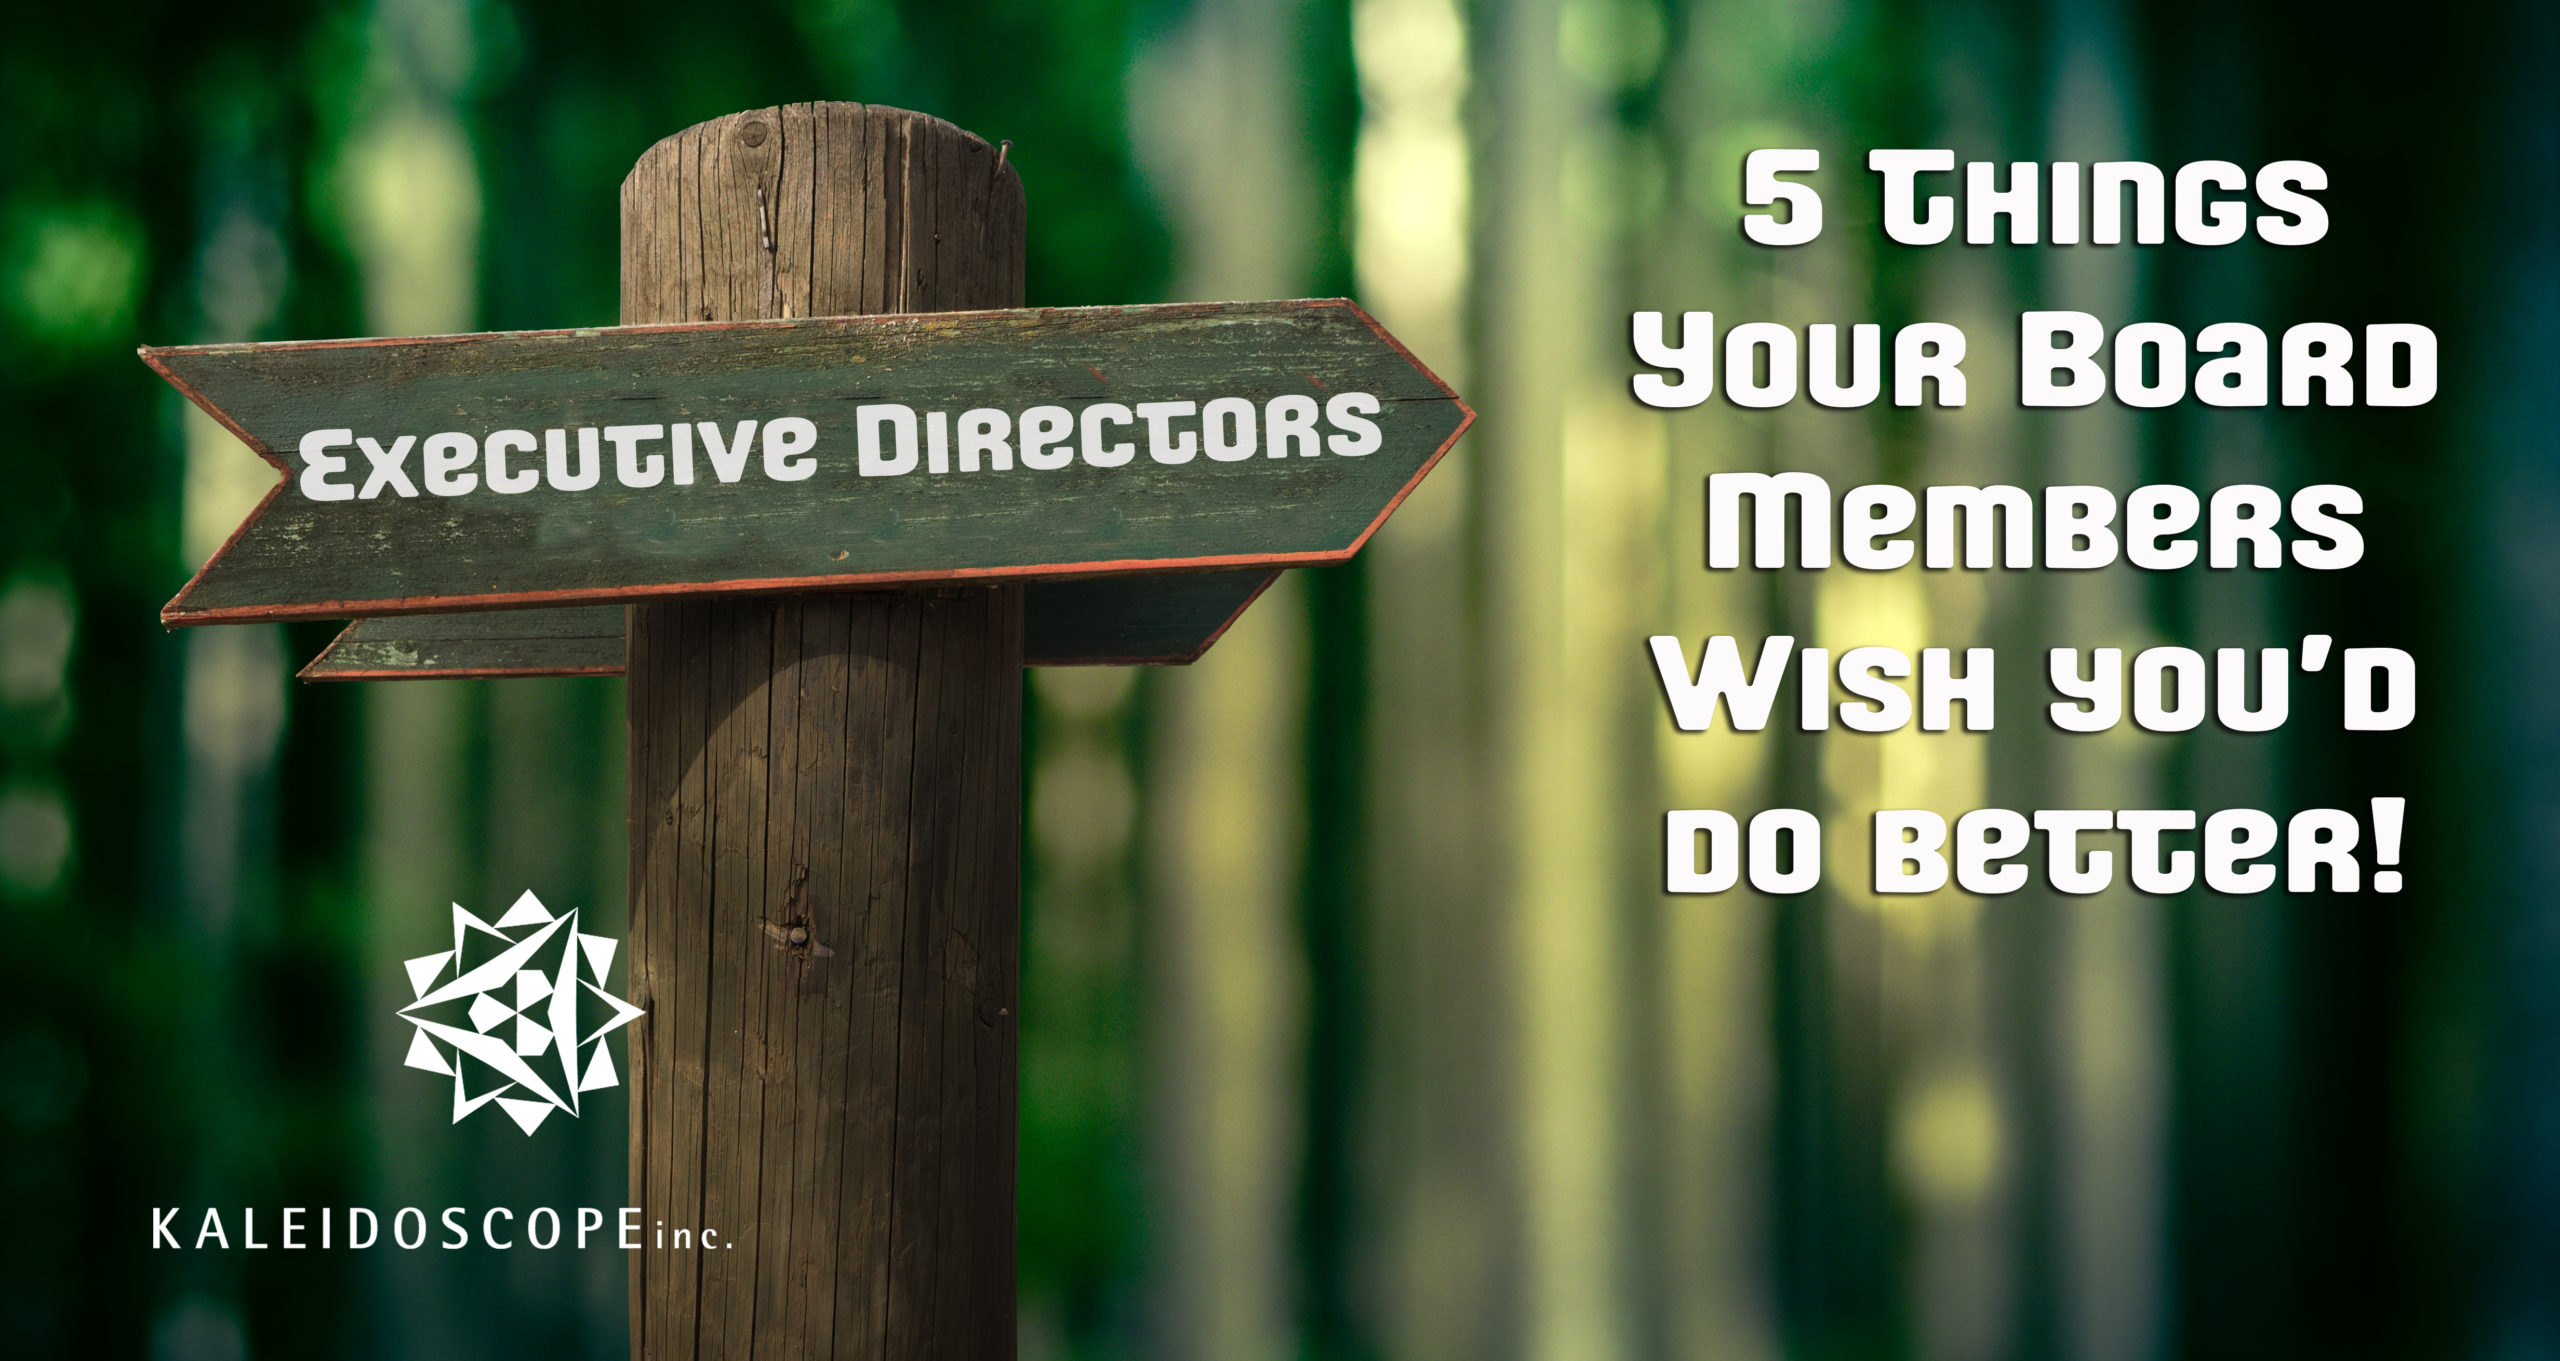 Five Things Every Board Member Wishes Their Executive Director Would Do Better